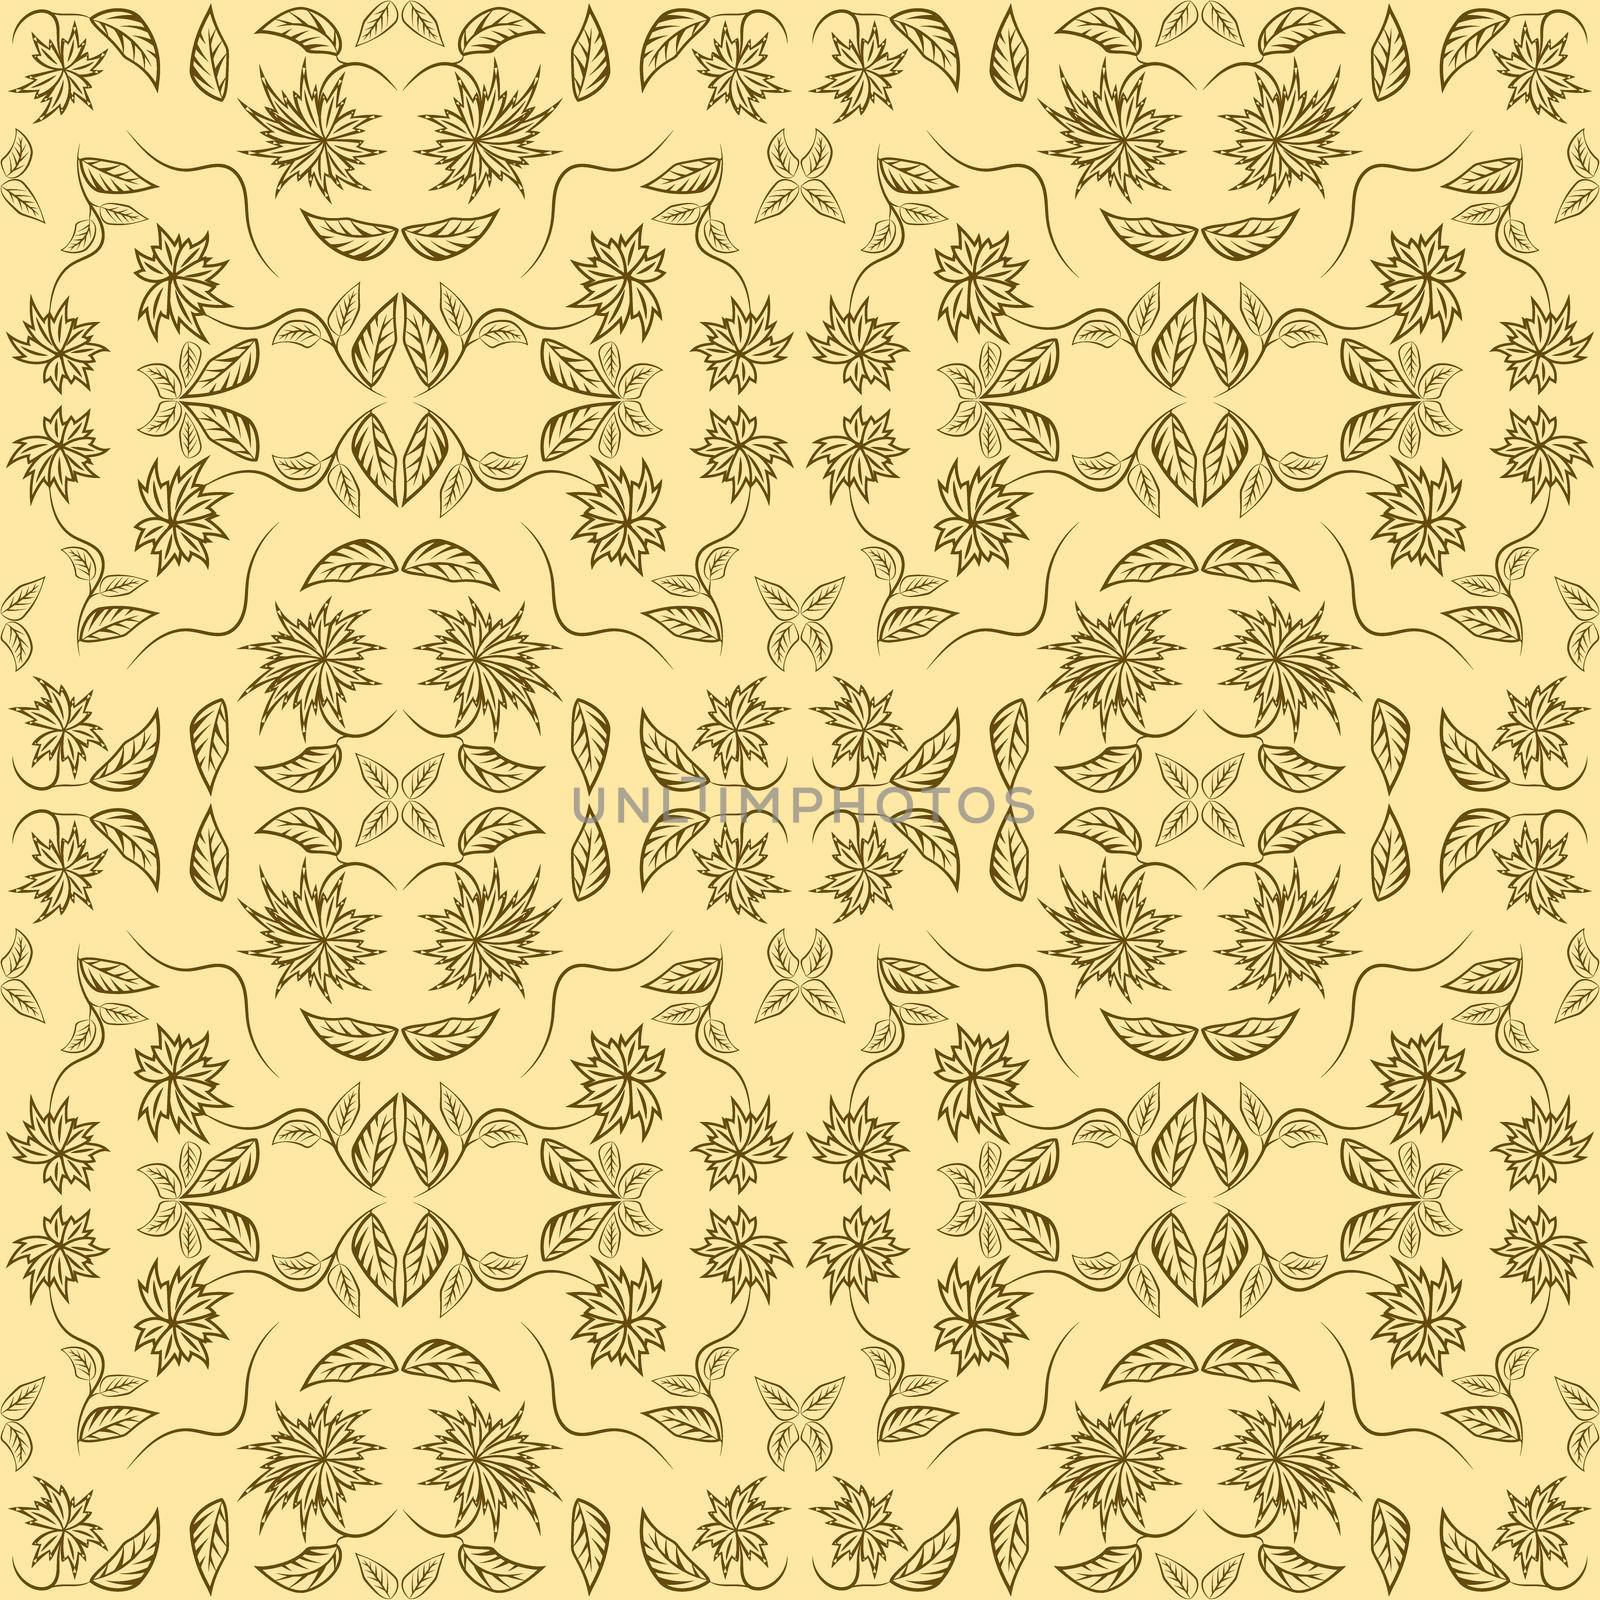 flower print pattern background with leaves, flowers, berries, for fabrics, wallpaper, interior, wall-coverings.  pattern with flowers and plants, floral illustration.